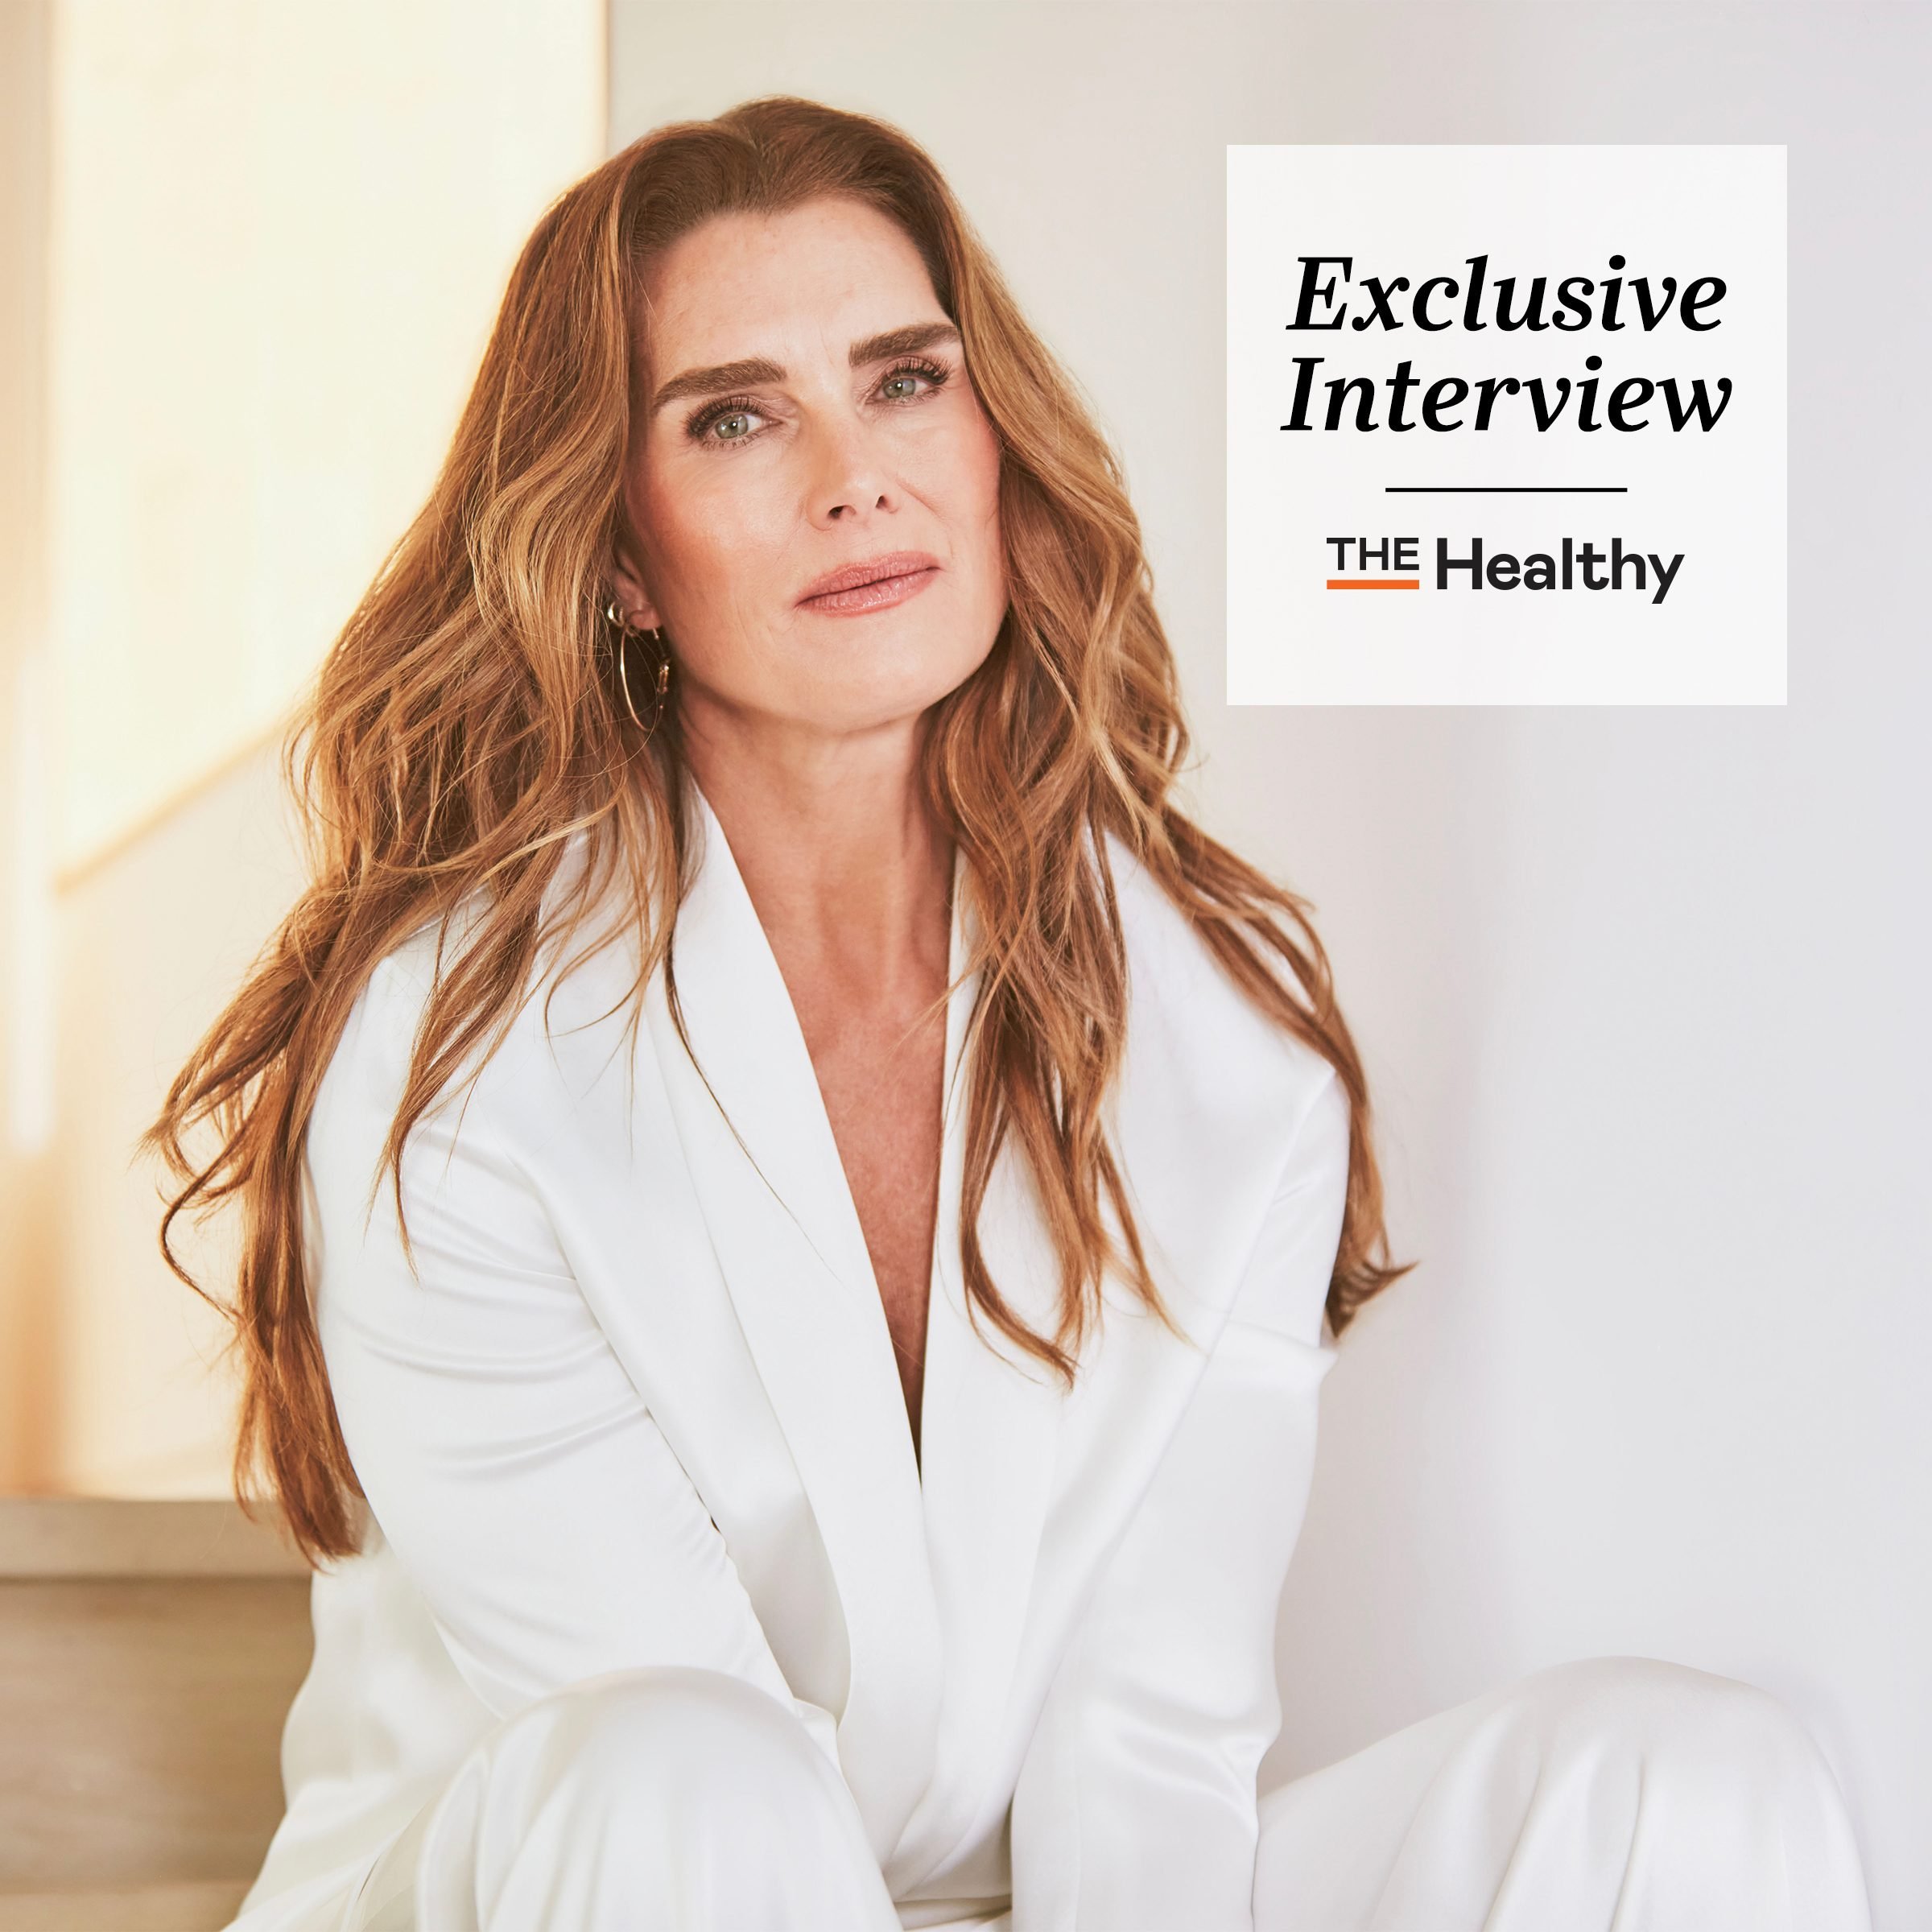 Brooke Shields Shares Her 4 Wellness Must-Haves and Reflections on the "Extraordinary" Privilege of Aging